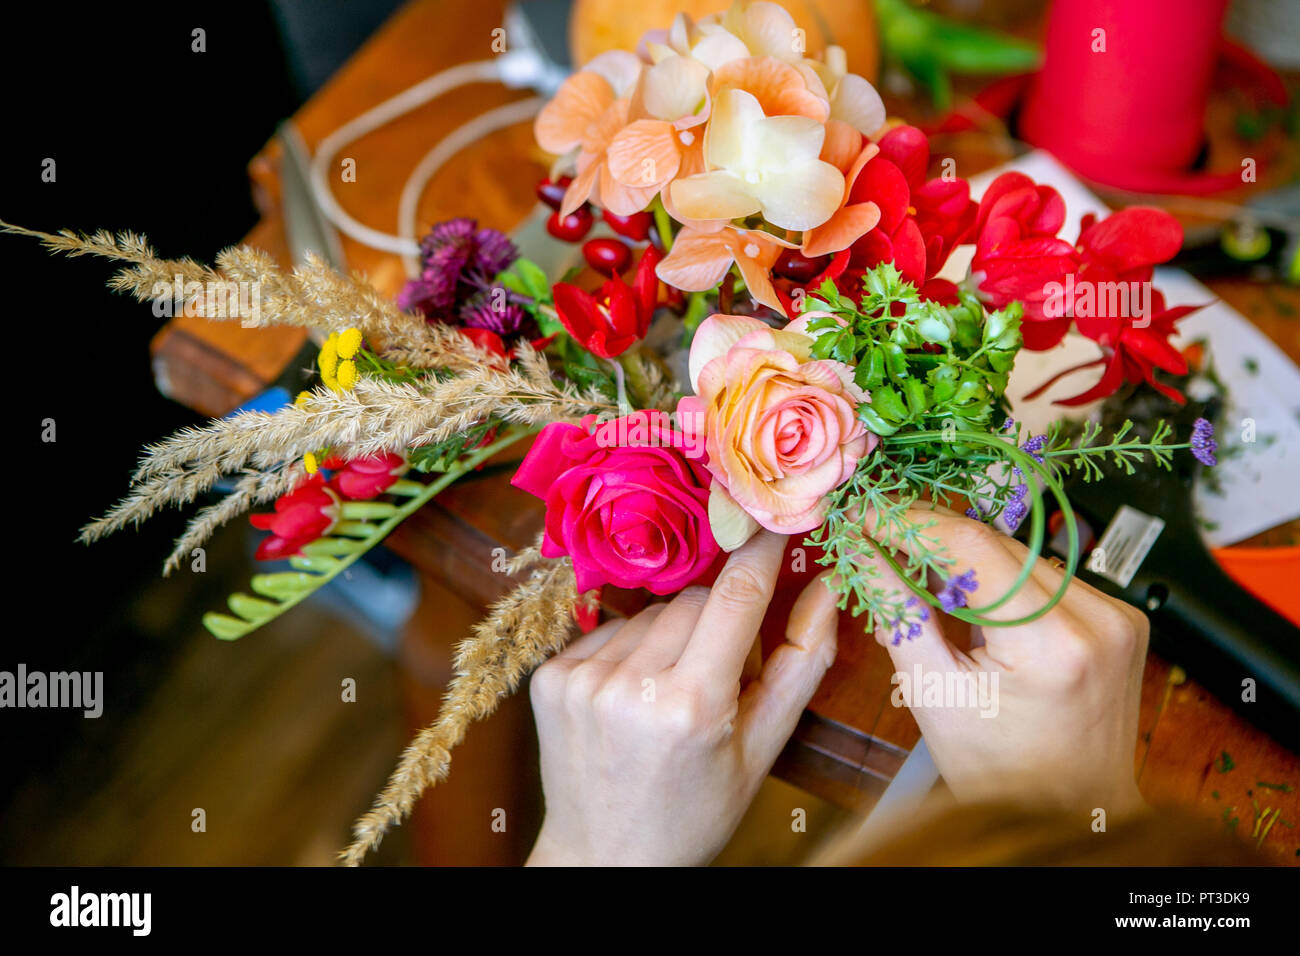 Female hands making beautiful bouquet of flowers on background Stock Photo